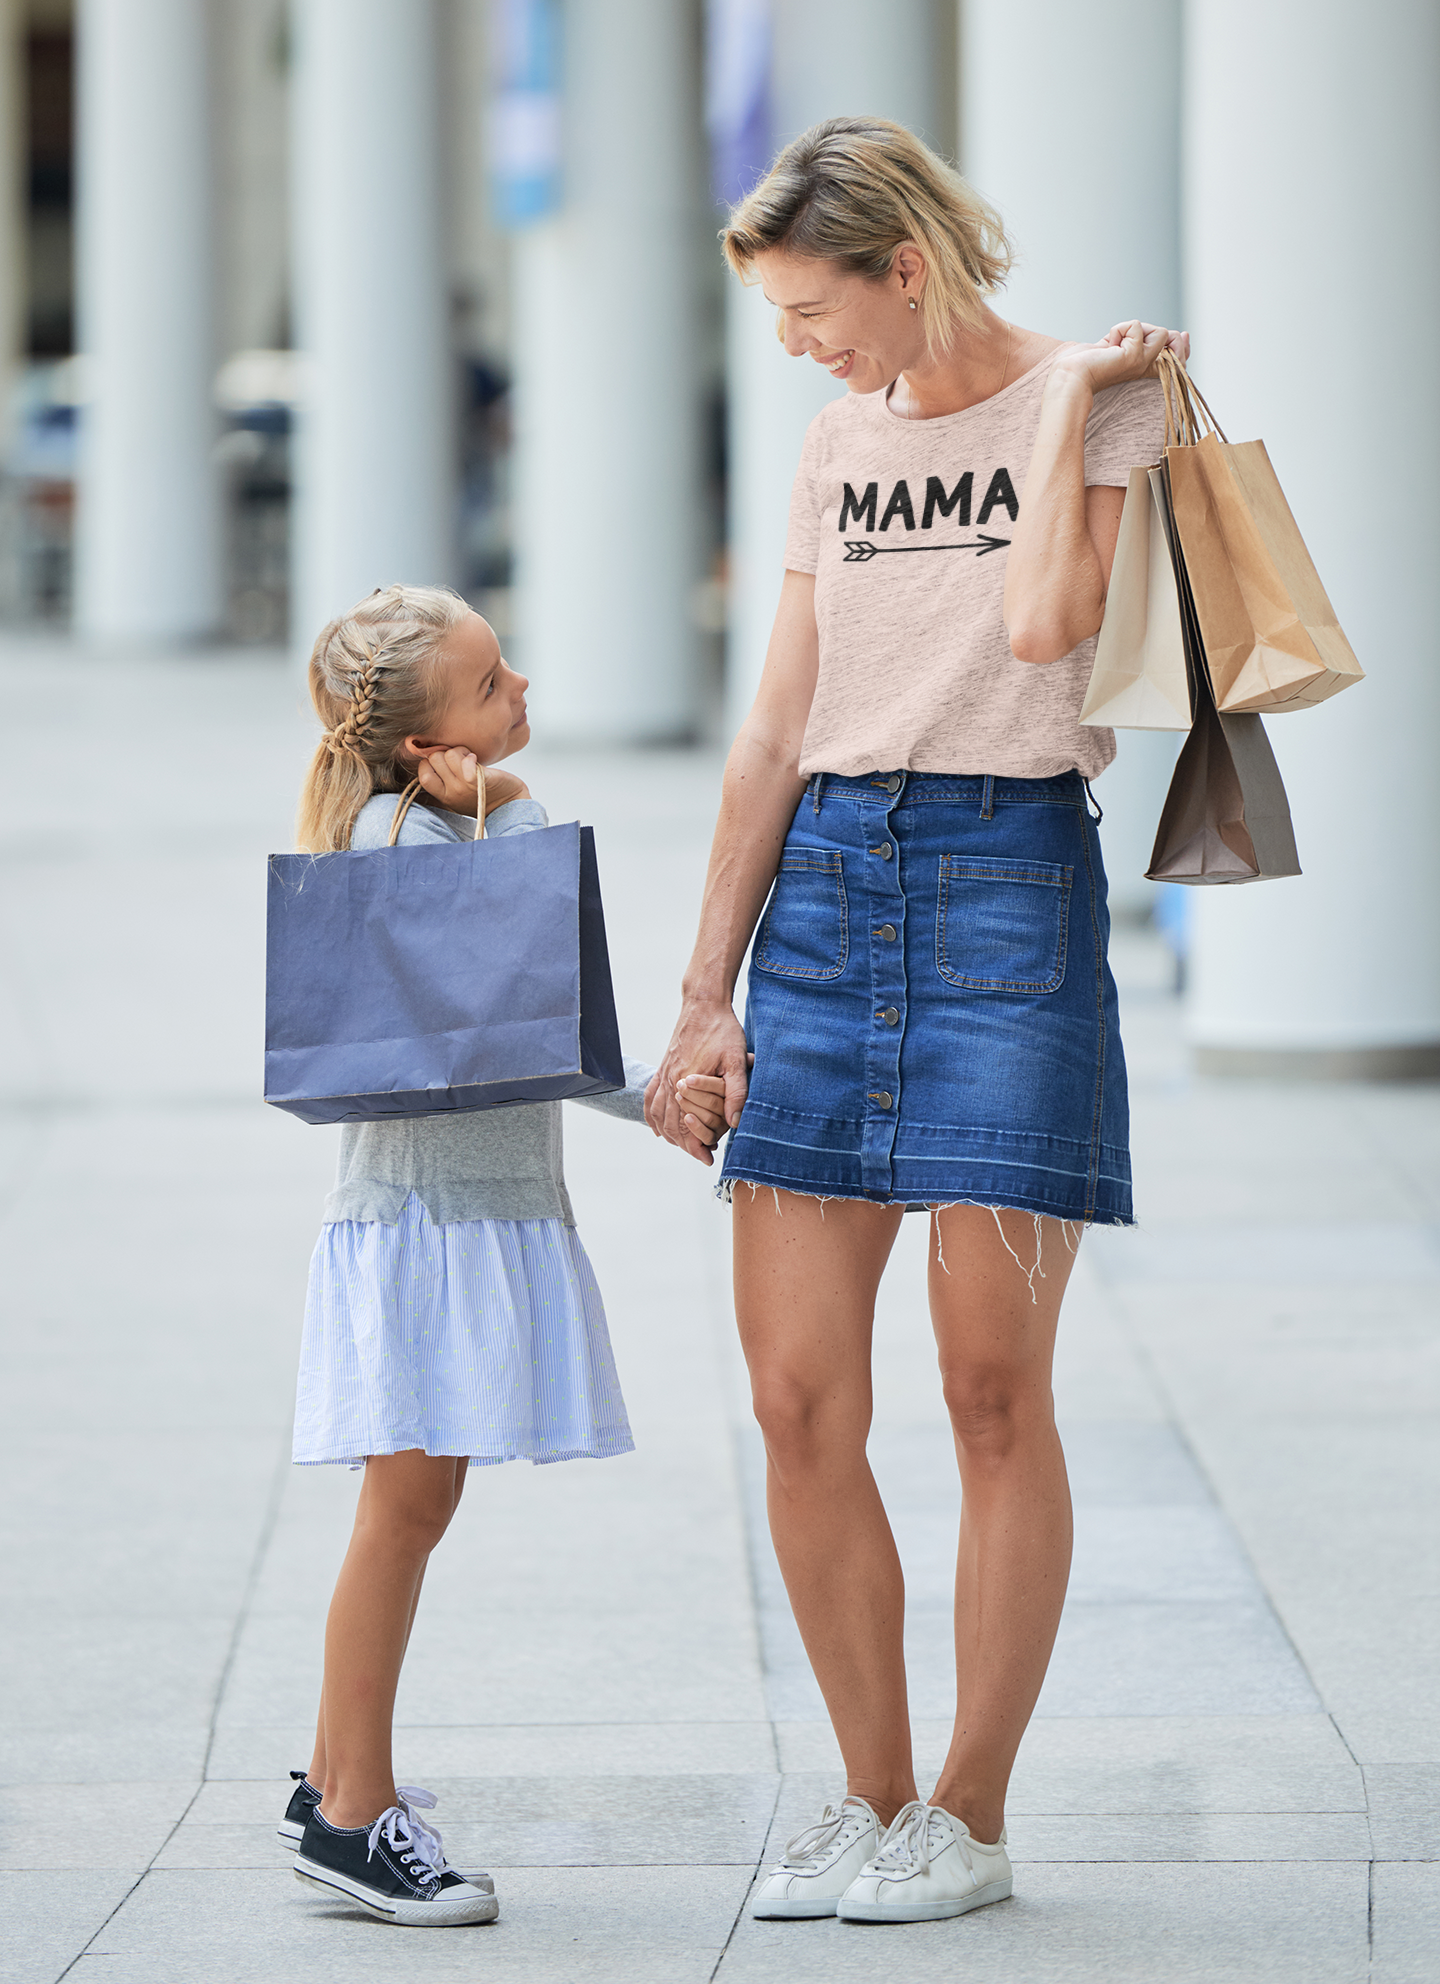 Mama - T-Shirt in heather prism peach. Mama is in a black design with an arrow below it pointing to the right. This is an image of a mom and her daughter shopping with her holding shopping bags. Mom has the Mama shirt on with denim jean skirt and tennis, with the little girl holding her hand wearing a light purple dress, gray sweater and black converse tennis shoes.